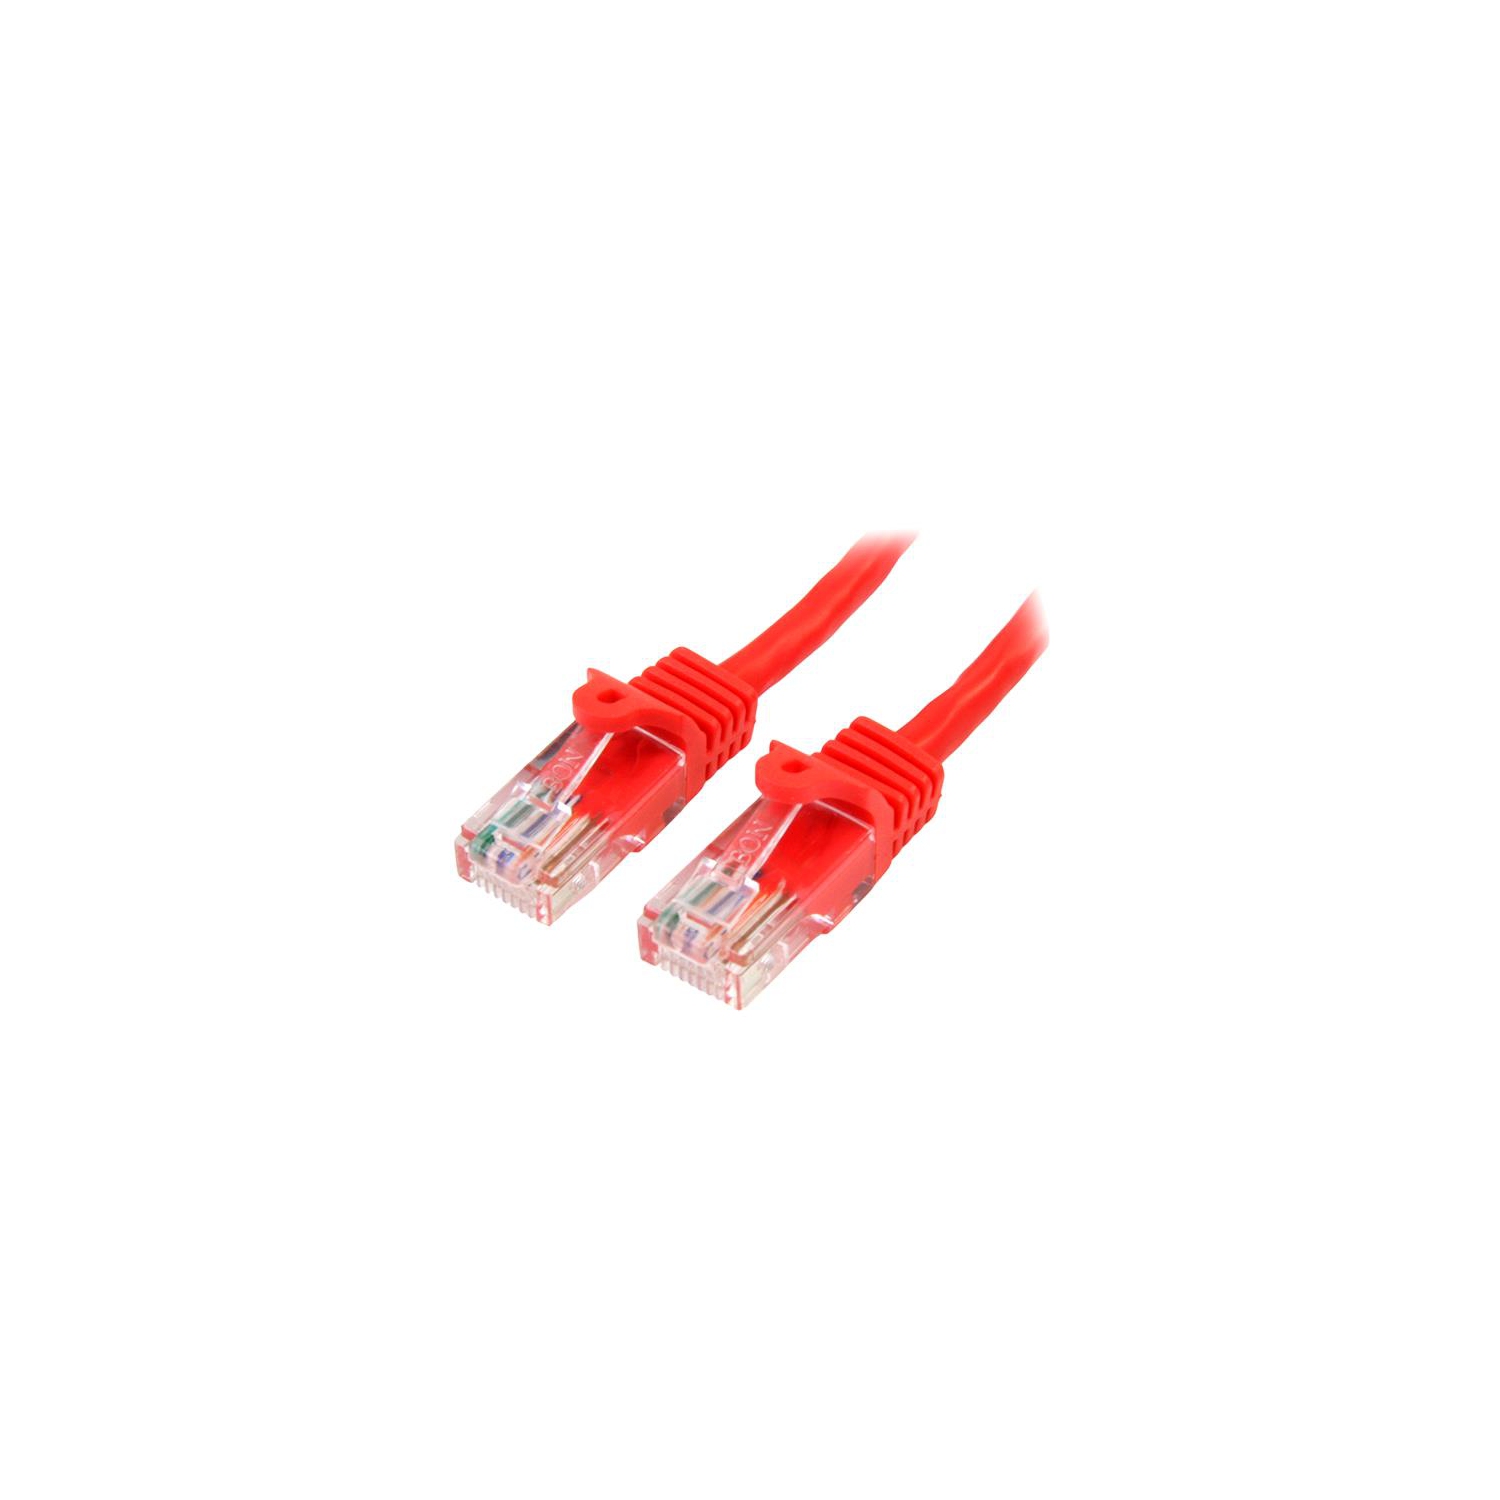 45PATCH30RD Long Network Cable 30ft 30 ft Red- Patch Cable Snagless Cat5e Cable Ethernet Cord StarTech.com Cat5e Ethernet Cable Cat 5e Cable 